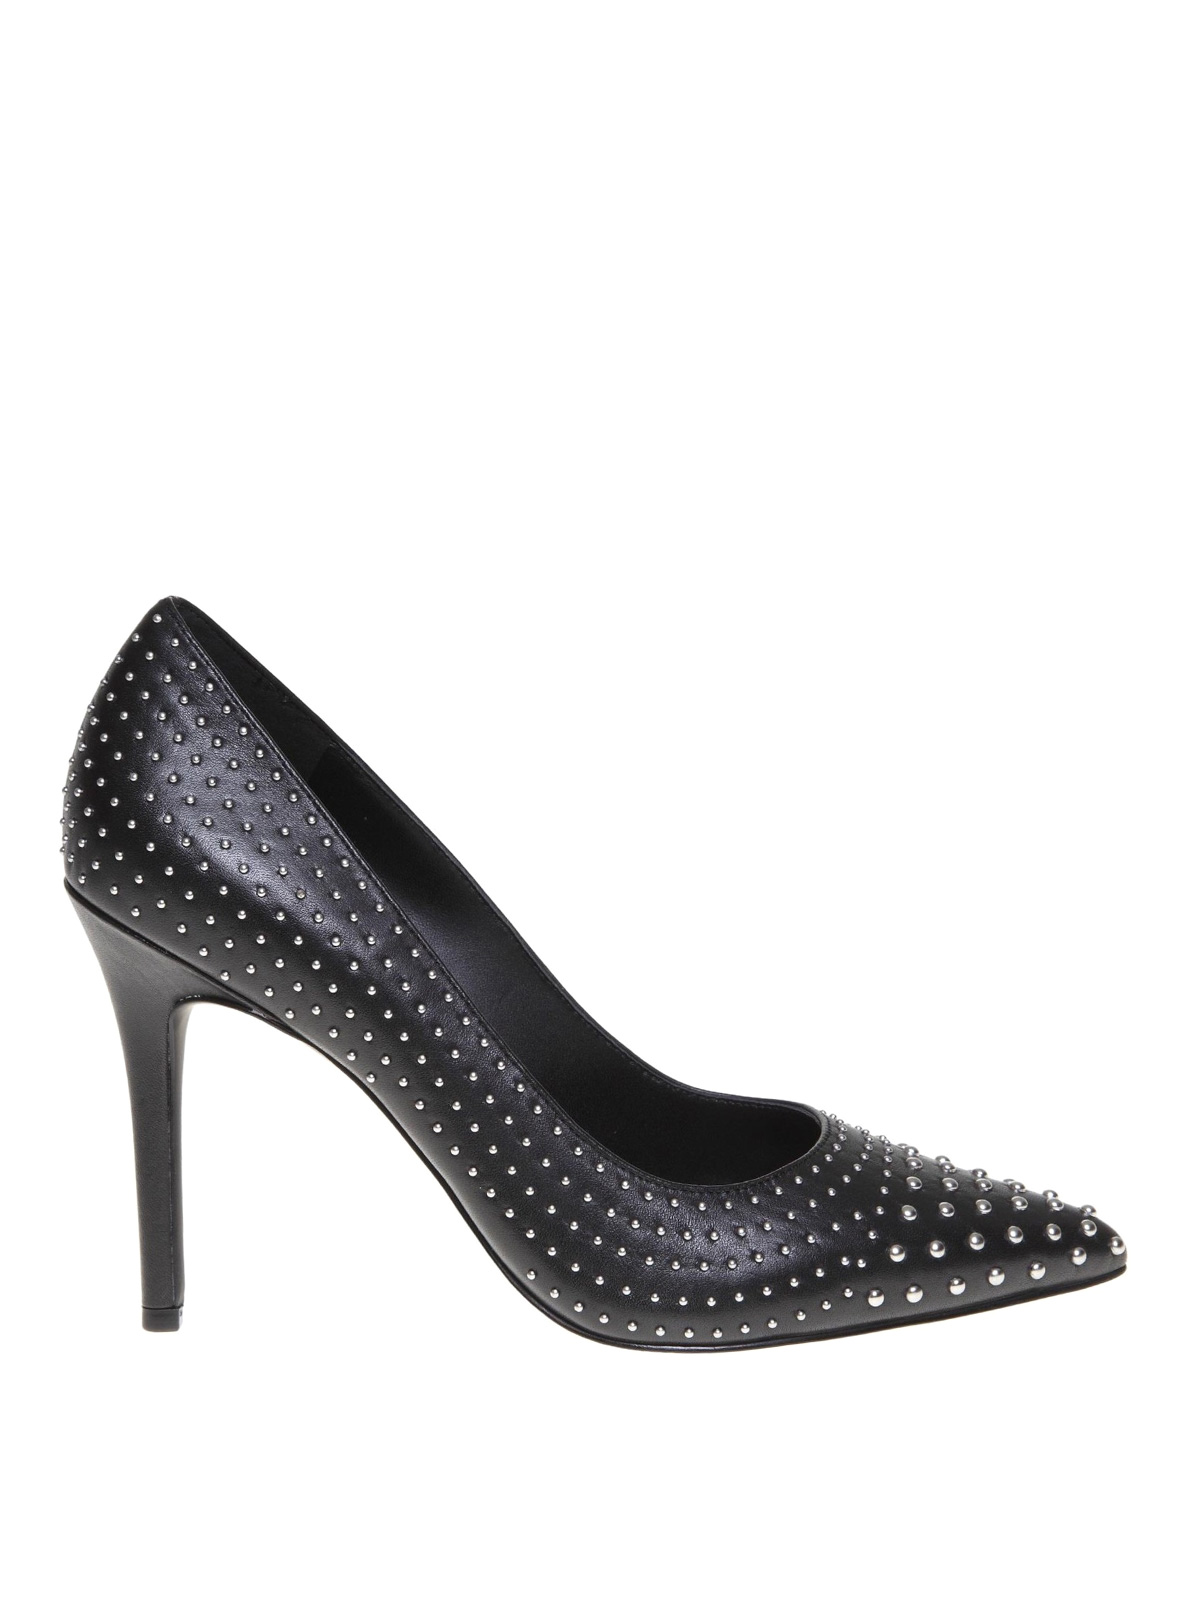 claire studded leather pump